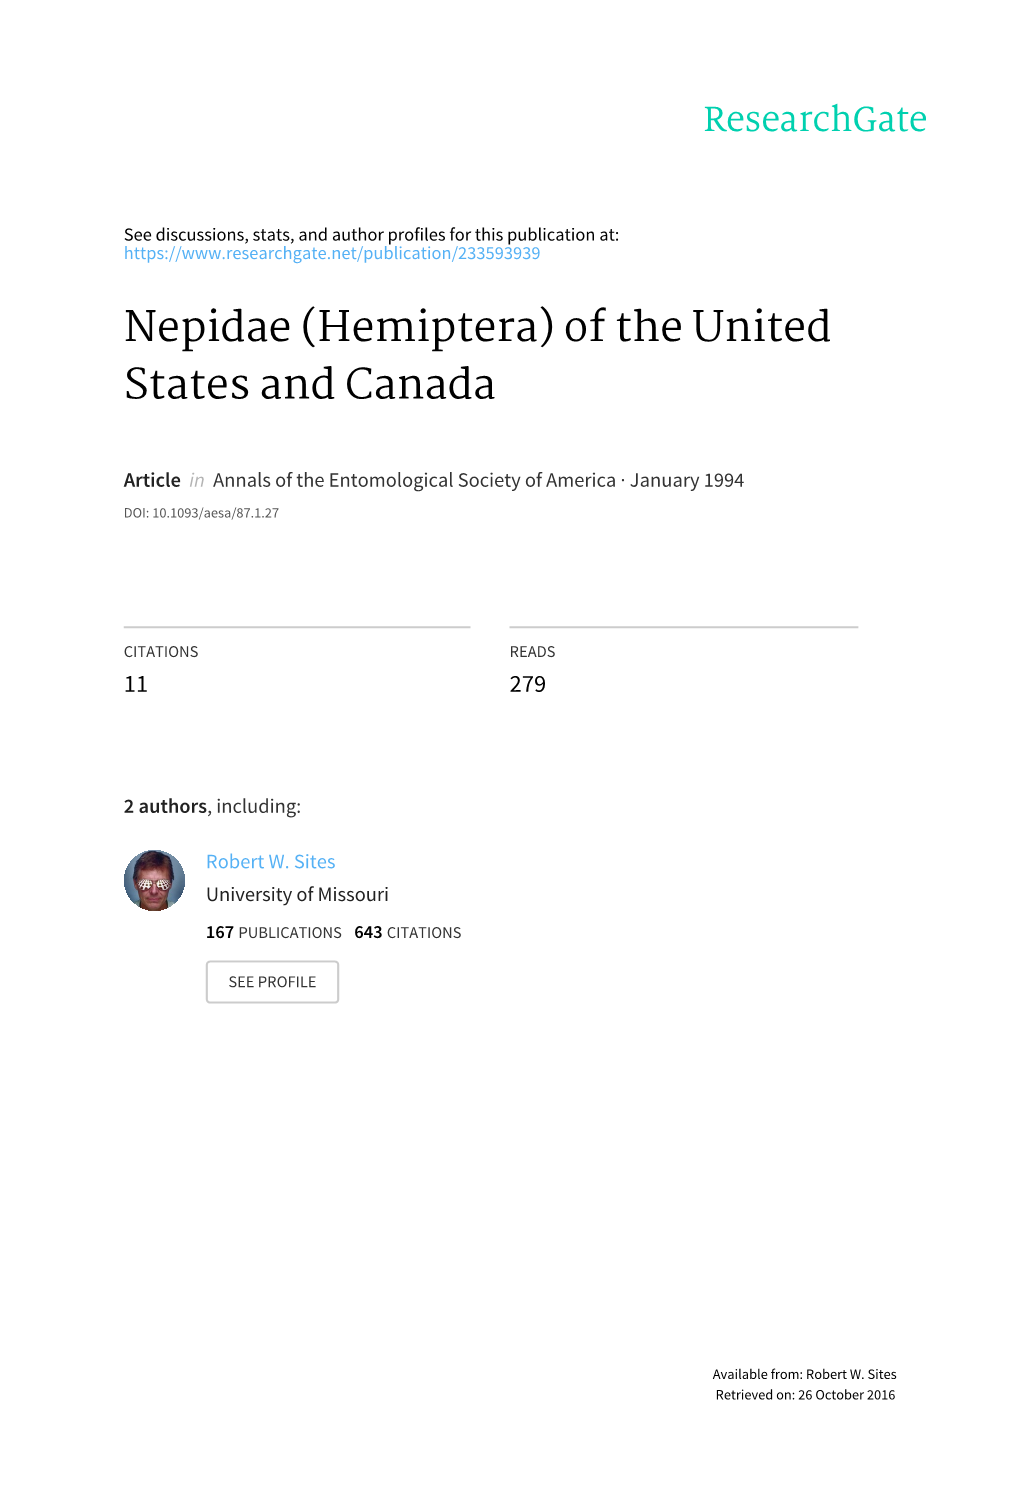 Nepidae (Hemiptera) of the United States and Canada